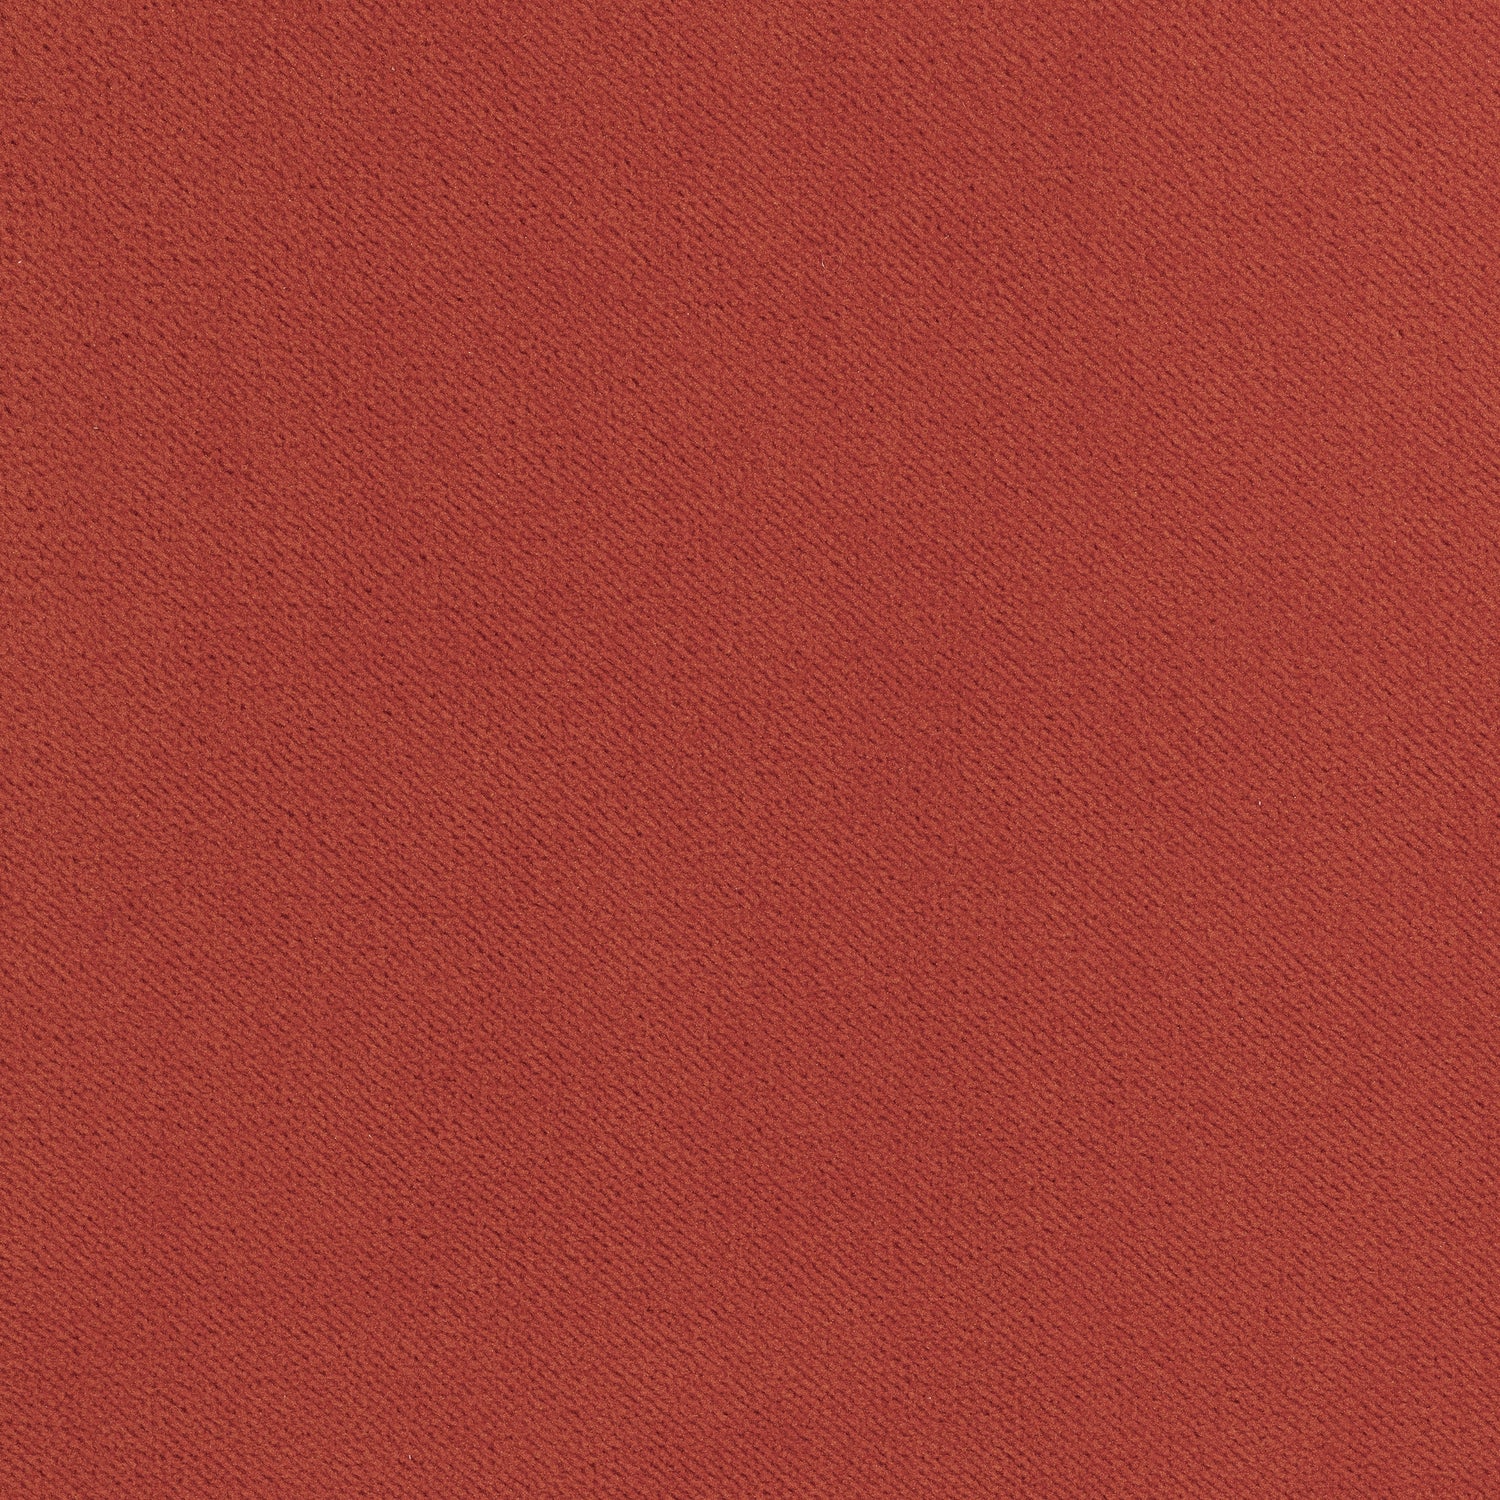 Club Velvet fabric in coral color - pattern number W7204 - by Thibaut in the Club Velvet collection